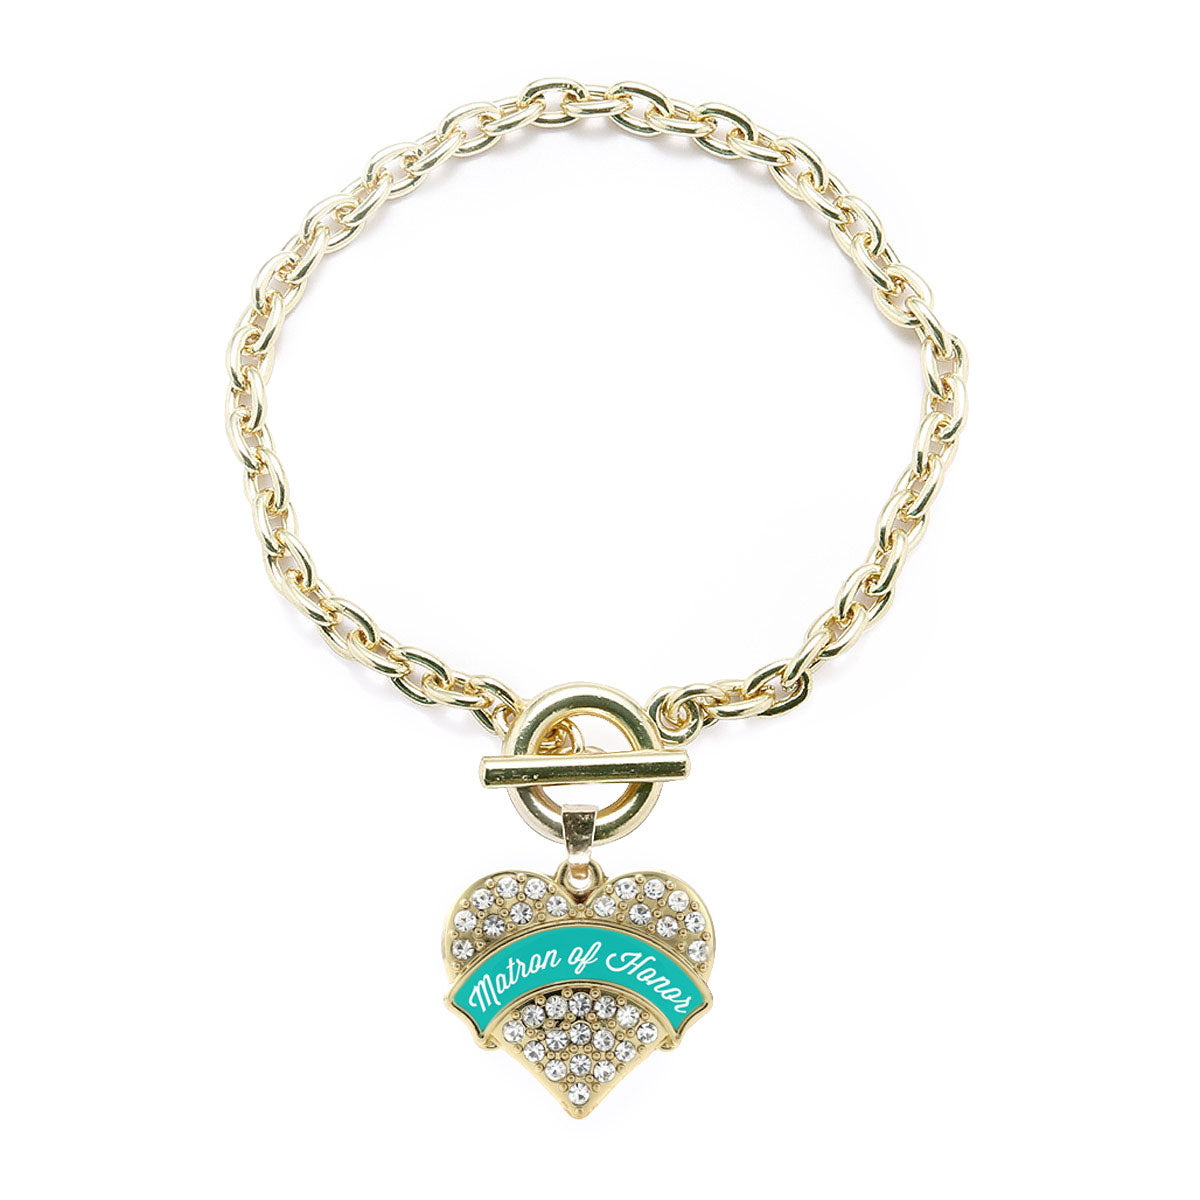 Gold Teal Matron of Honor Pave Heart Charm Toggle Bracelet